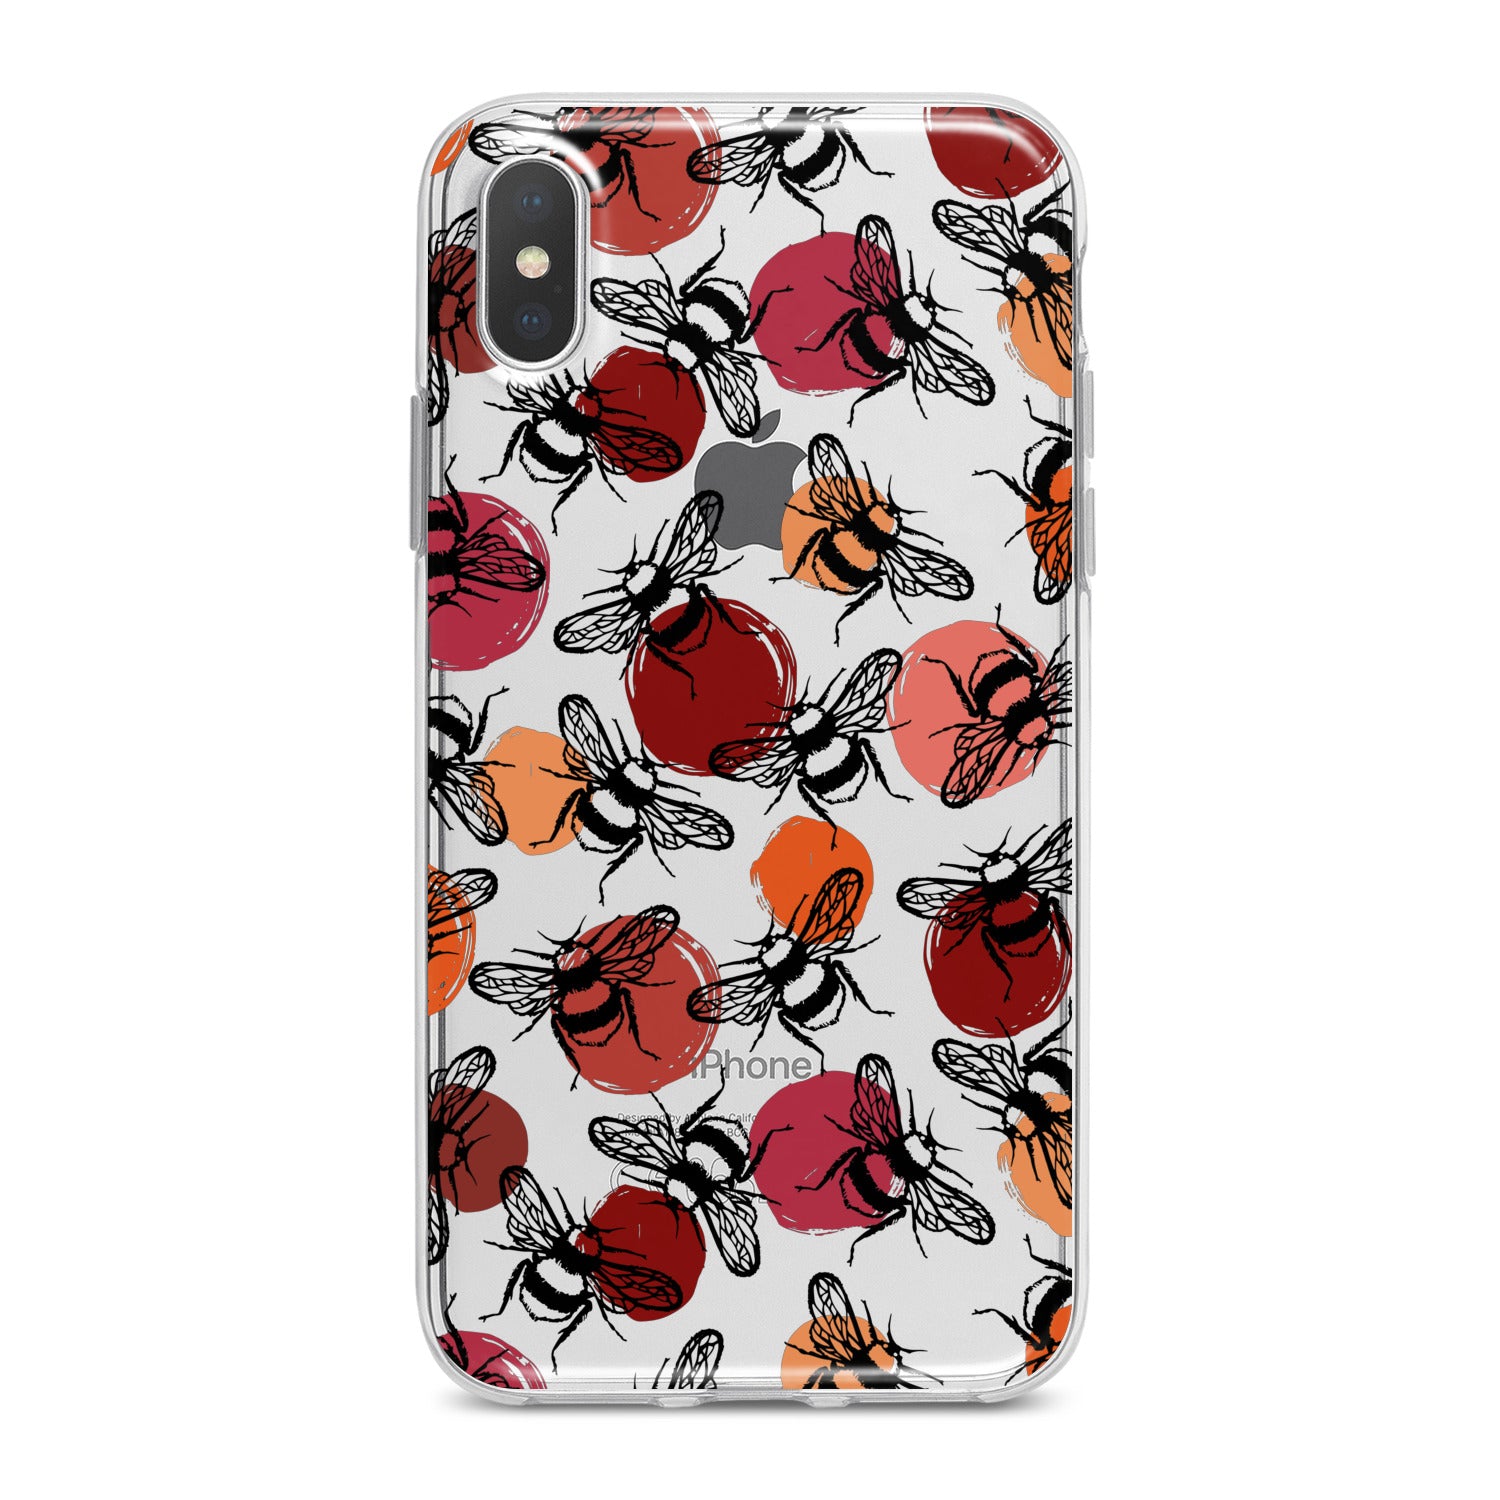 Lex Altern Black Graphic Bee Phone Case for your iPhone & Android phone.